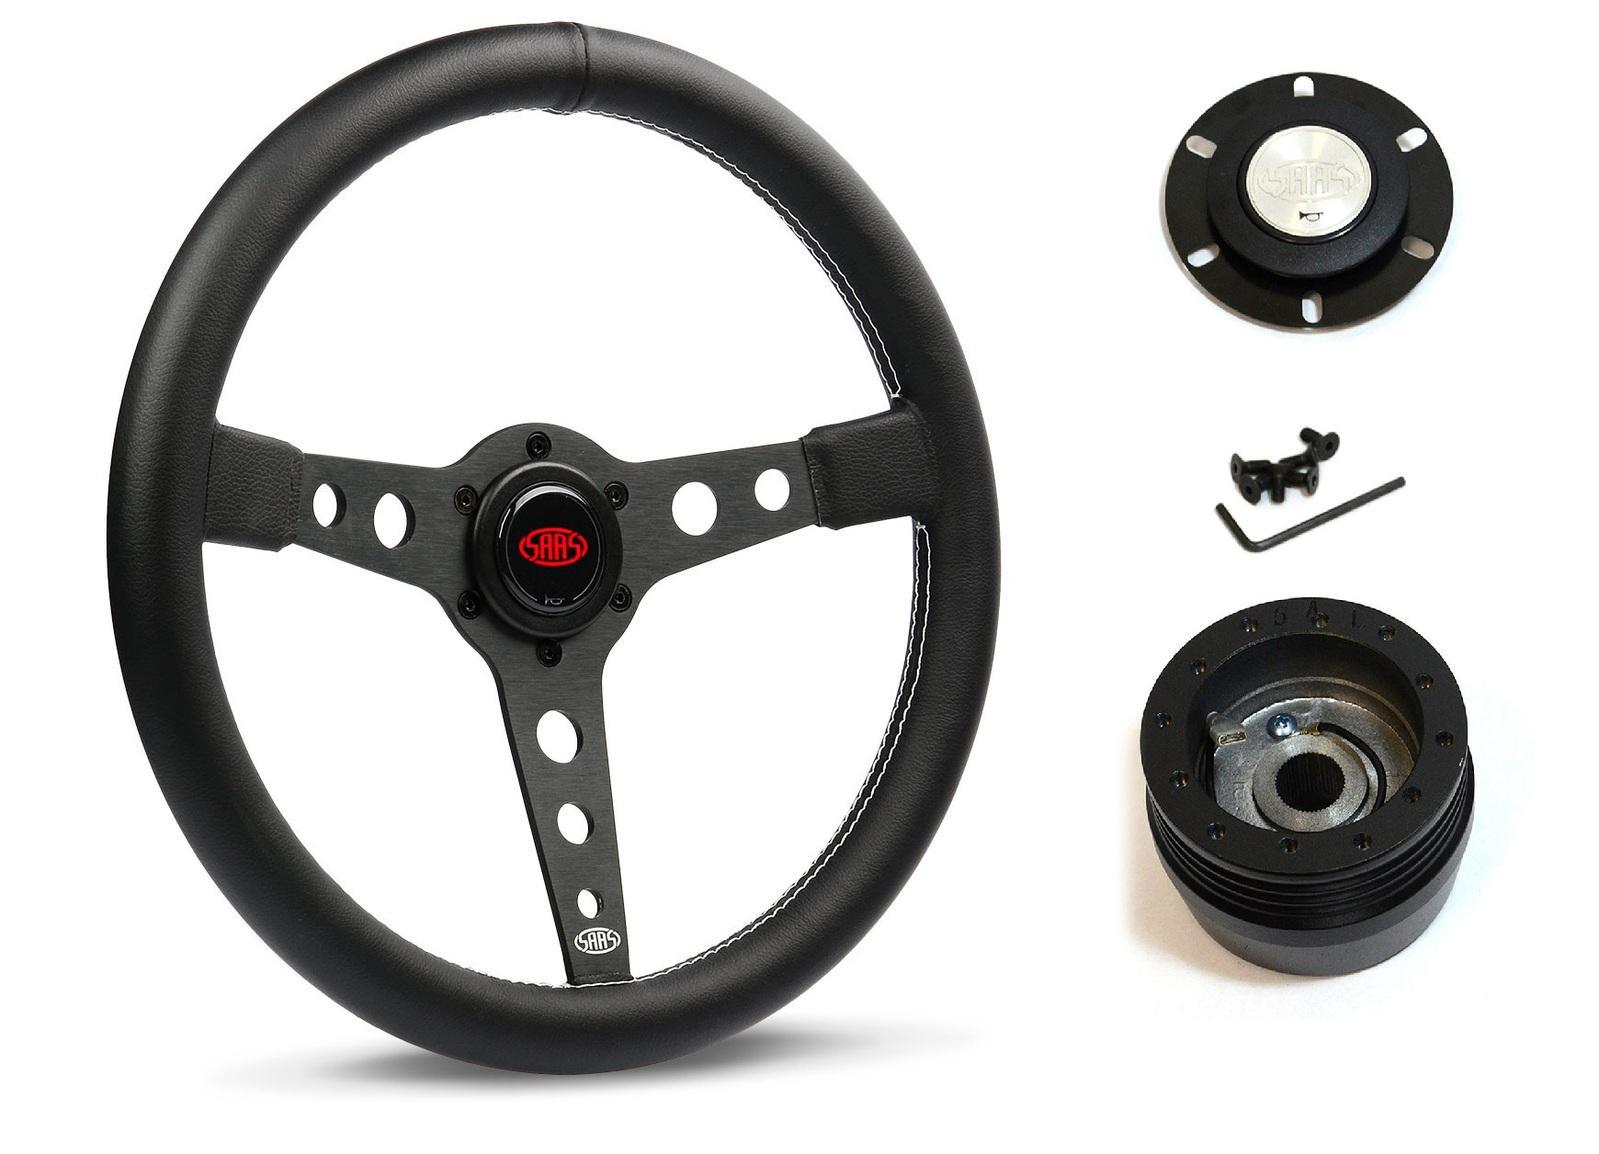 SAAS Steering Wheel Leatherette 14" ADR Retro Black Spoke White Stitching SW616OS-WS and SAAS boss kit for Holden Rodeo KB 1980-1988